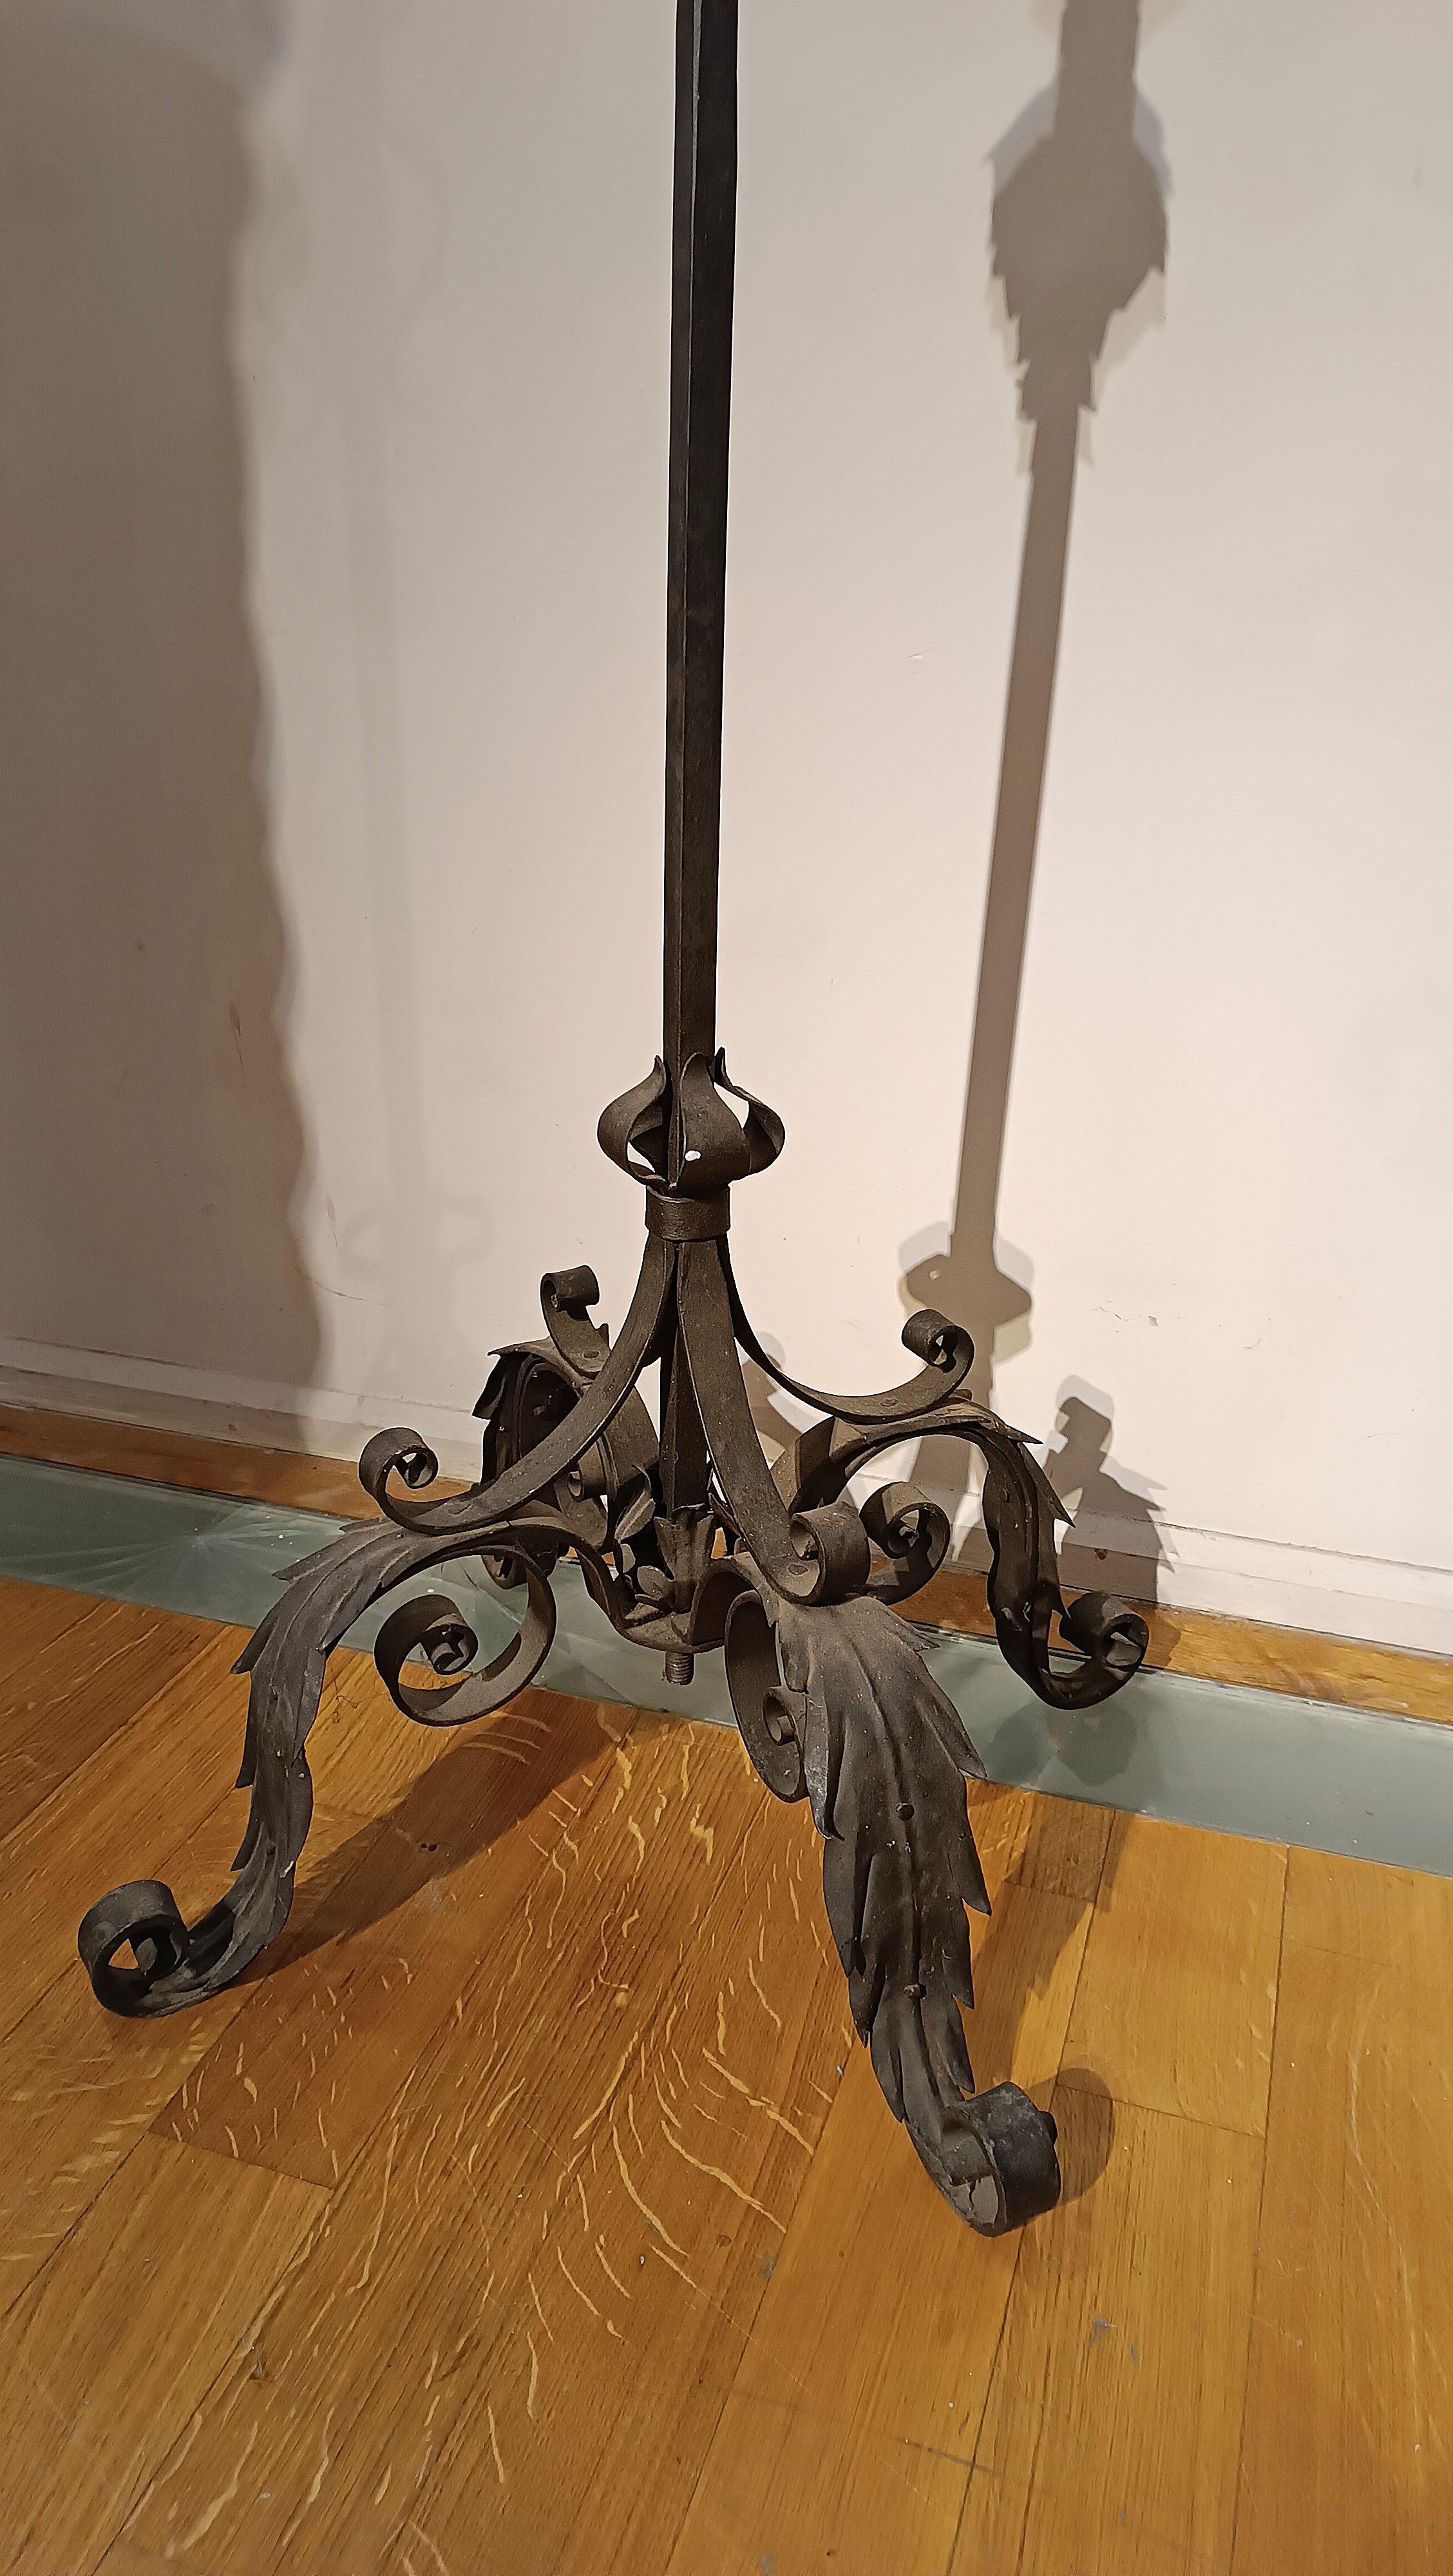 19th Century END OF THE 19th CENTURY IRON LANTERN HOLDER For Sale